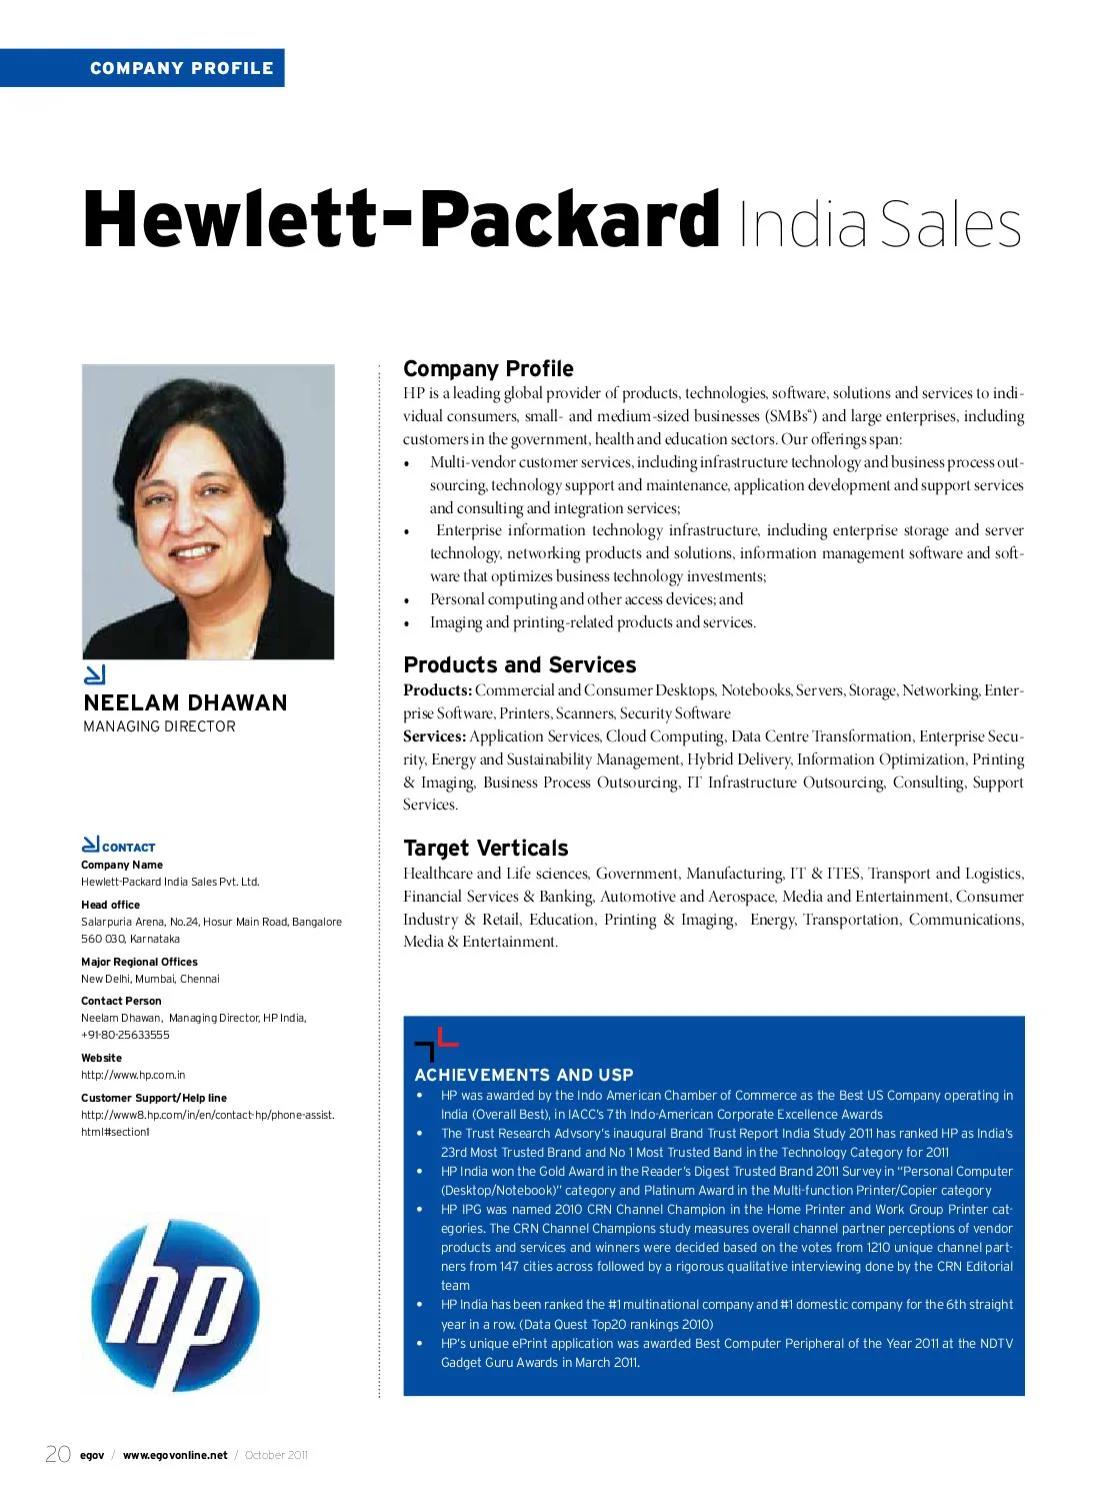 hewlett packard india sales - What is the headcount of HP in India